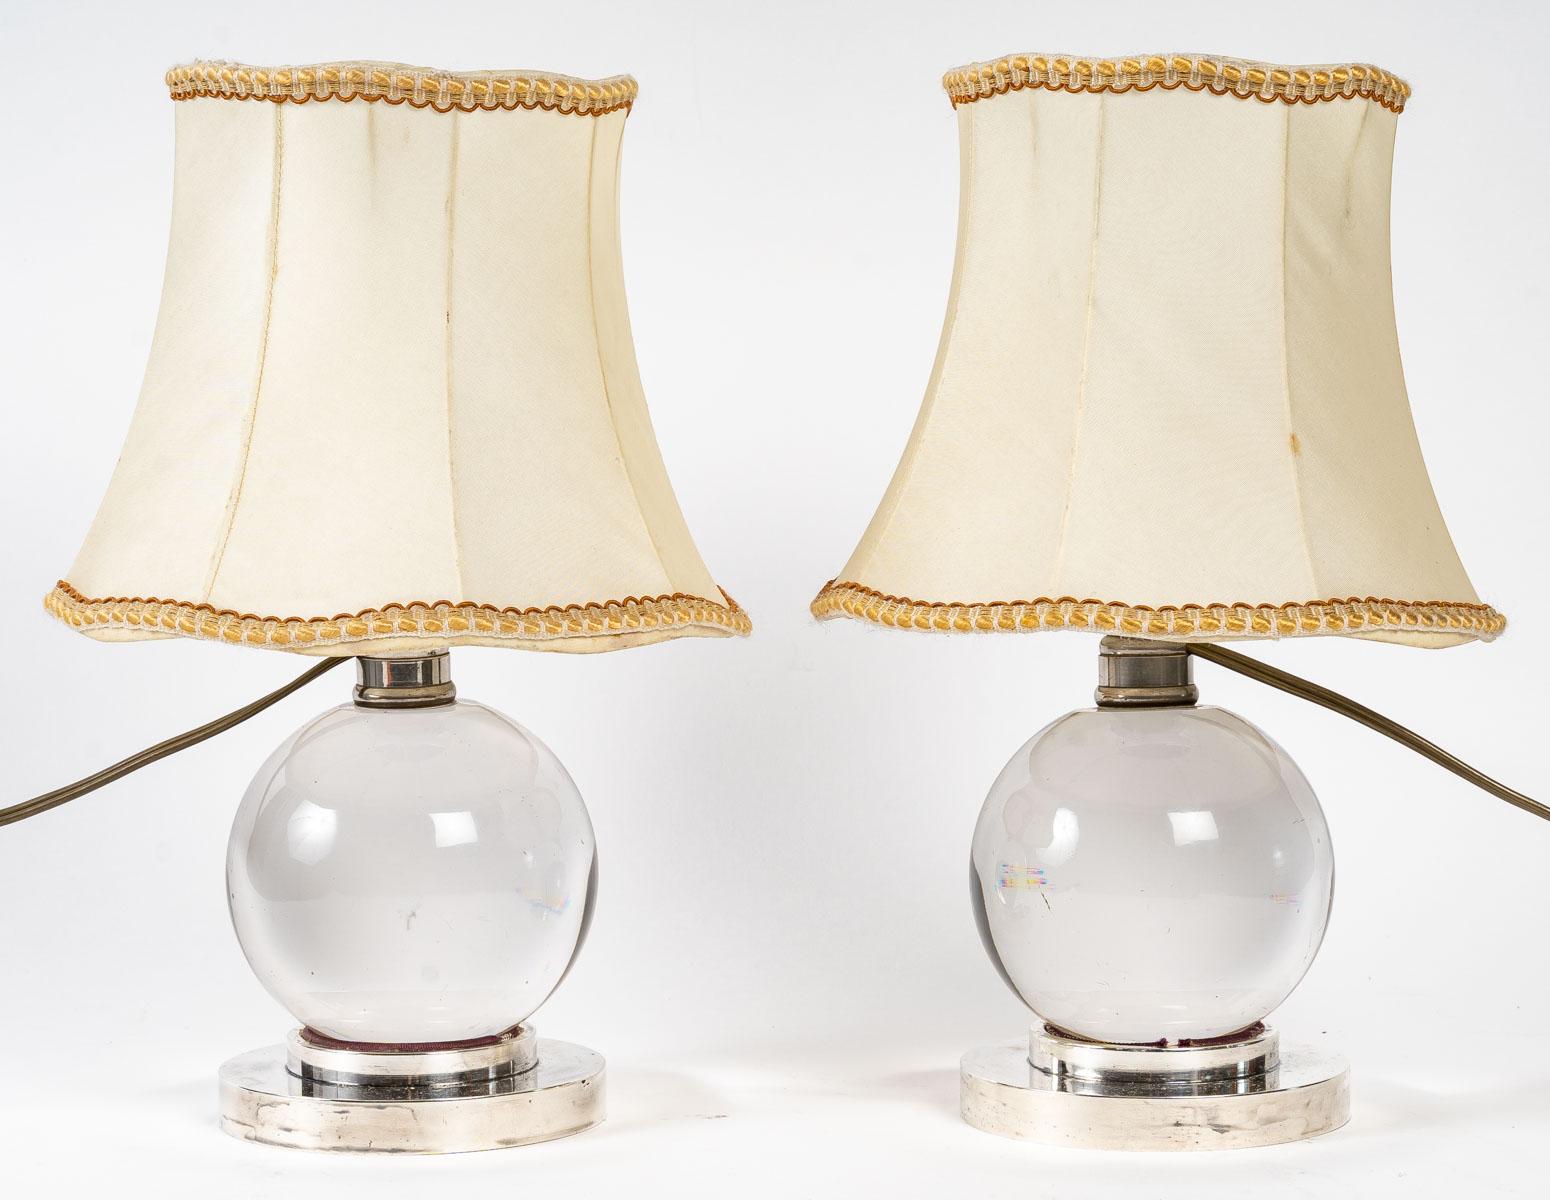 Pair of crystal lamps by Jaques ADNET
Baccarat crystal ball lamp base resting on a nickel-plated bronze base allowing the ball to swivel. Original lampshade.
With lampshade - h: 30 cm, w: 20 cm
ref 3224